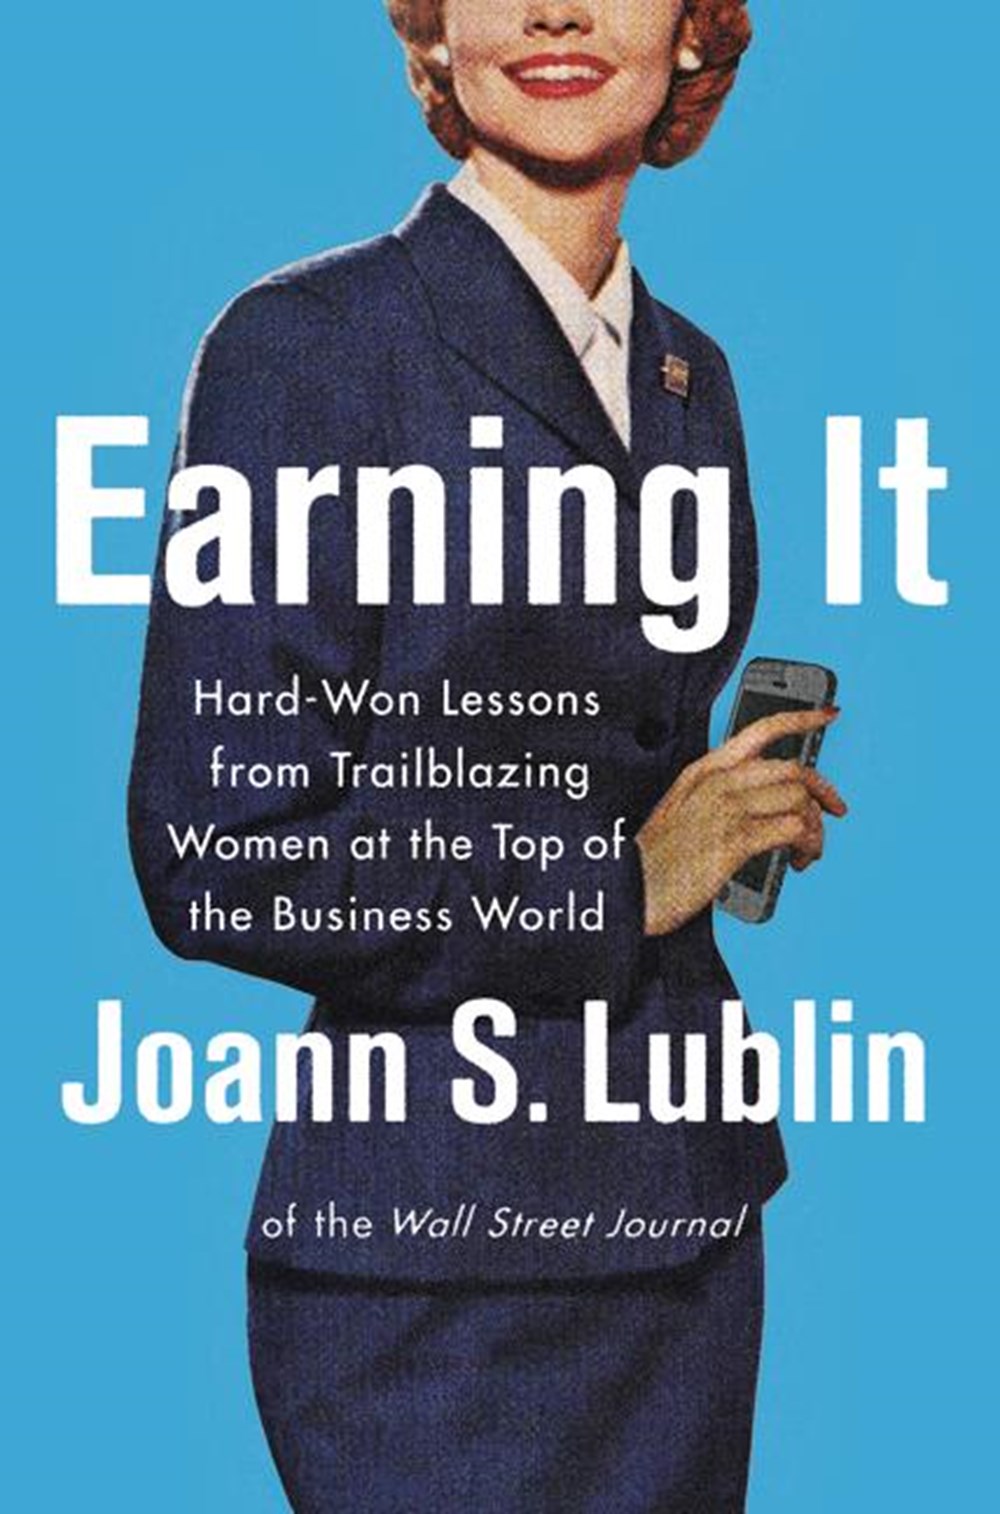 Earning It Hard-Won Lessons from Trailblazing Women at the Top of the Business World